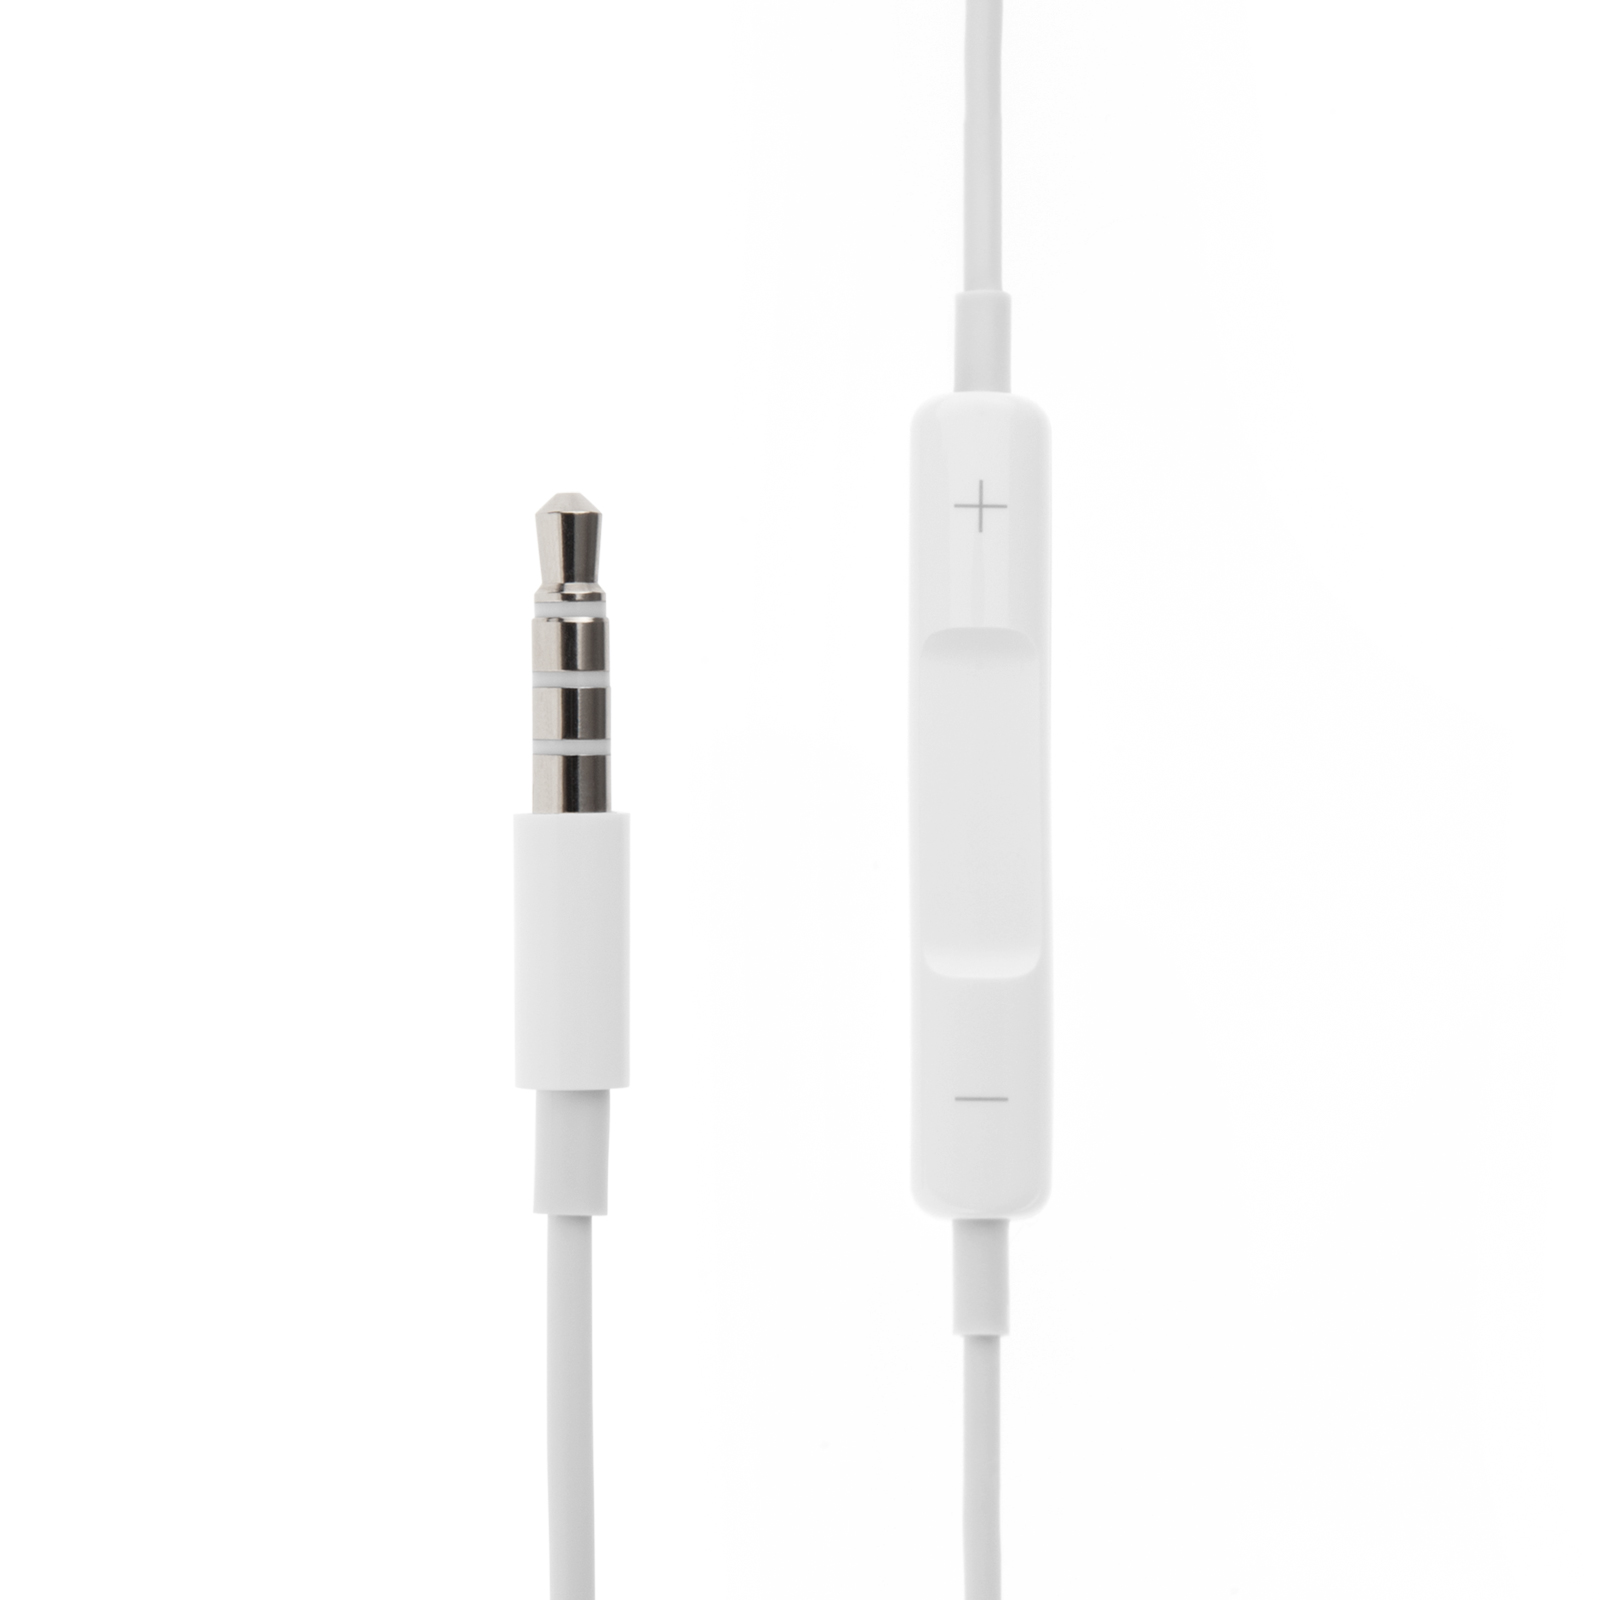 Official Apple EarPods Earphones with Remote and Mic 